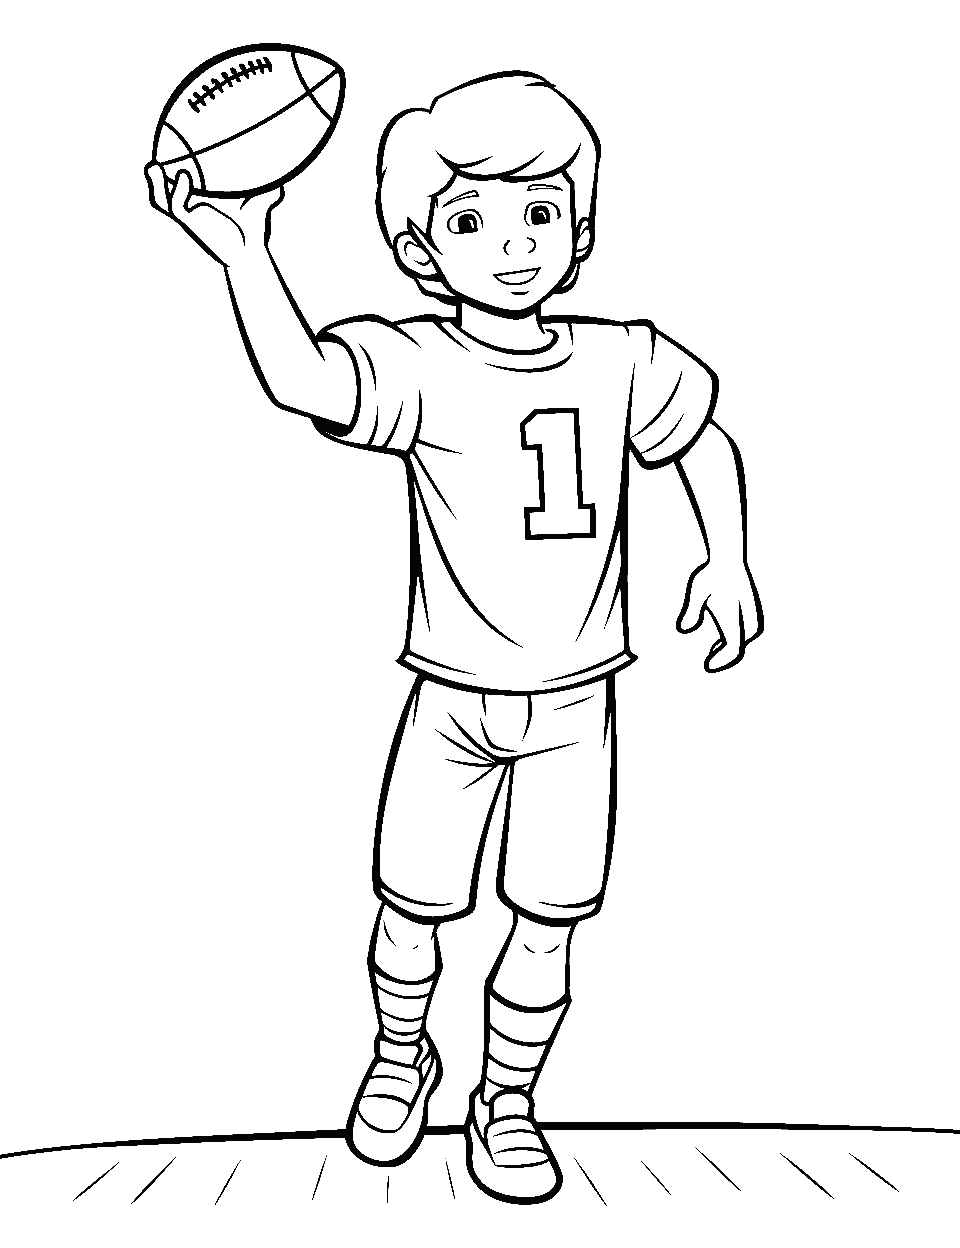 Fan on Field Coloring Page - A fan throwing in the ball from outside the line of the field.